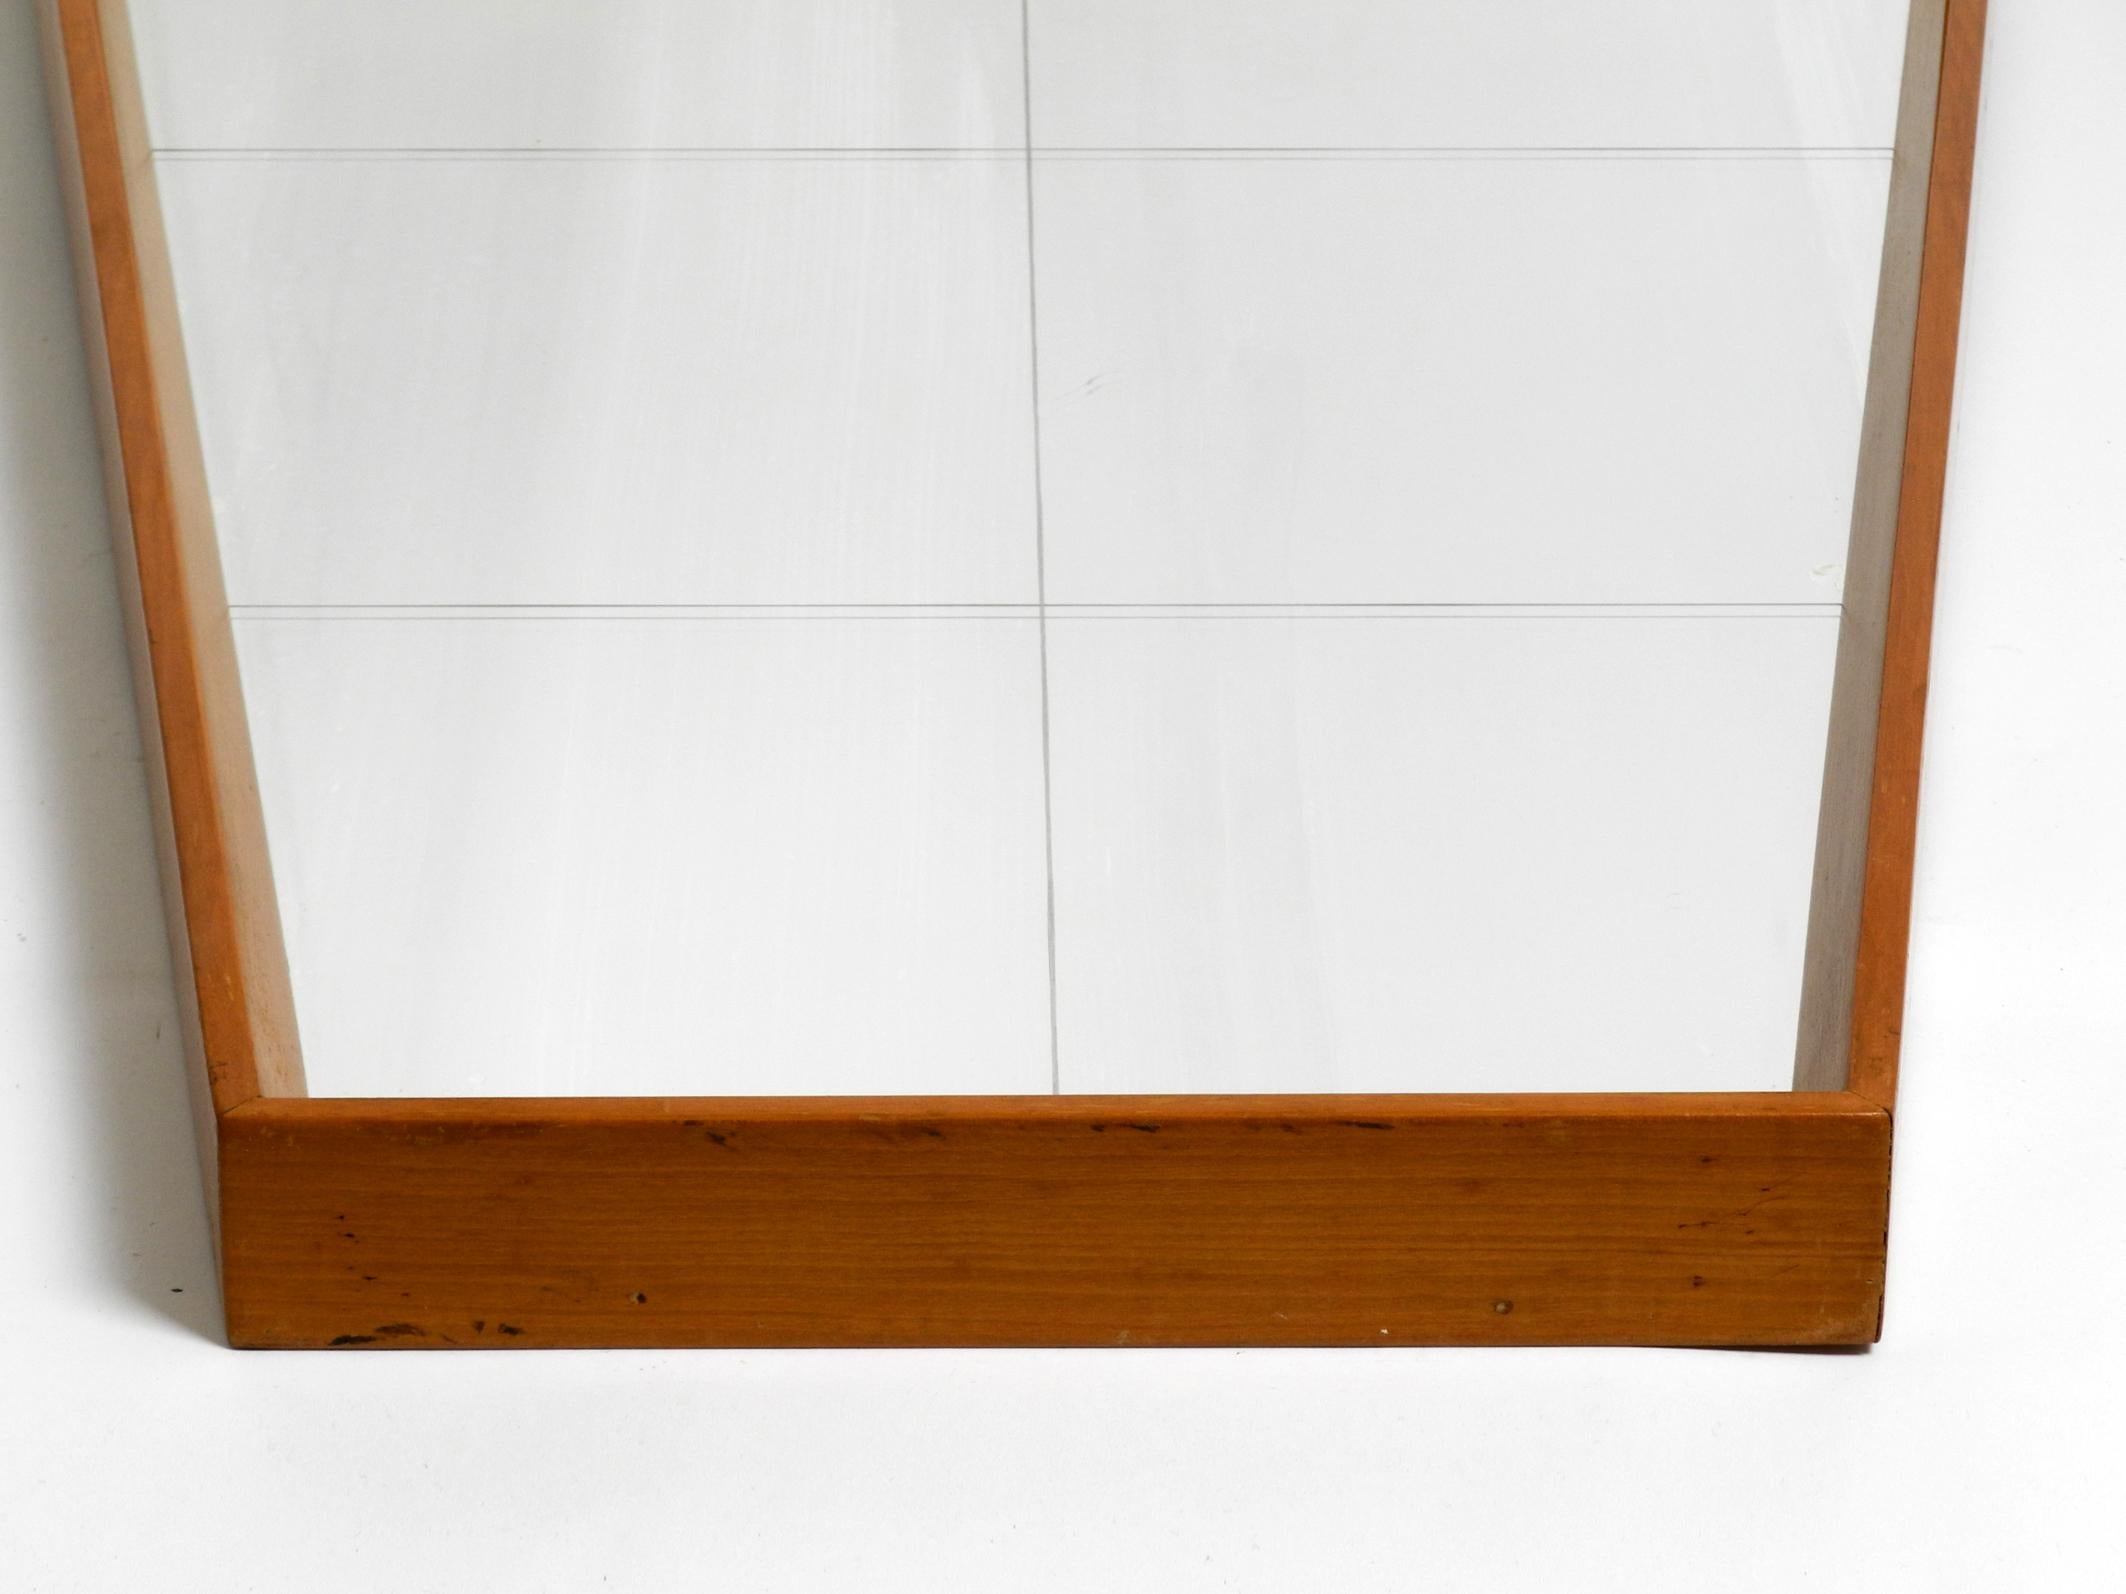 Large 1950s wall mirror in trapezoidal shape with a solid cherry wood frame For Sale 10